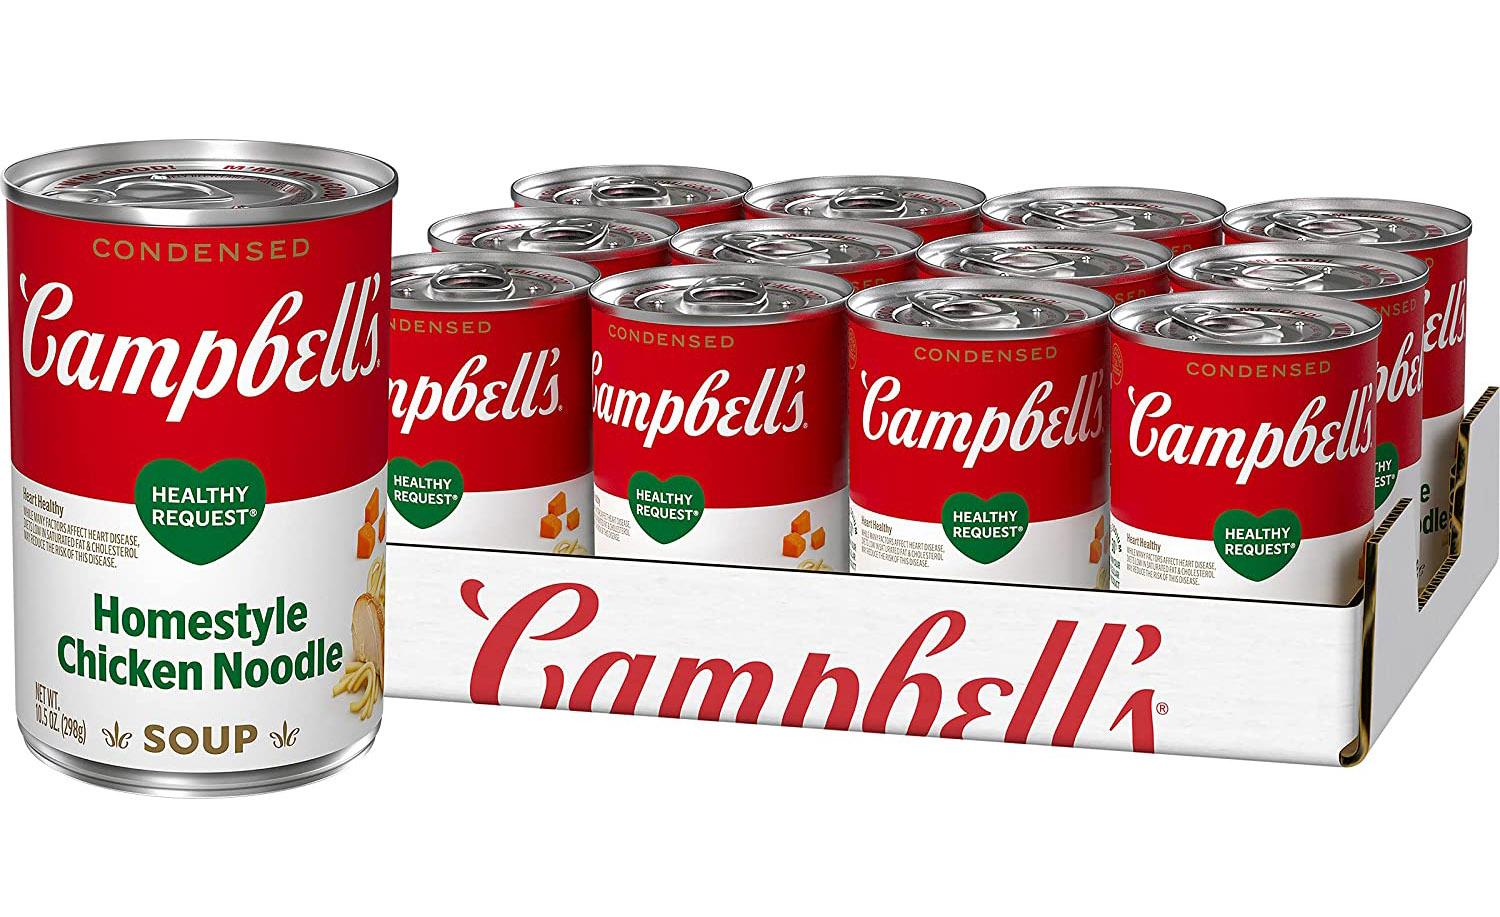 Campbells Condensed Healthy Request Chicken Noodle Soup 12 Pack for $12.75 Shipped